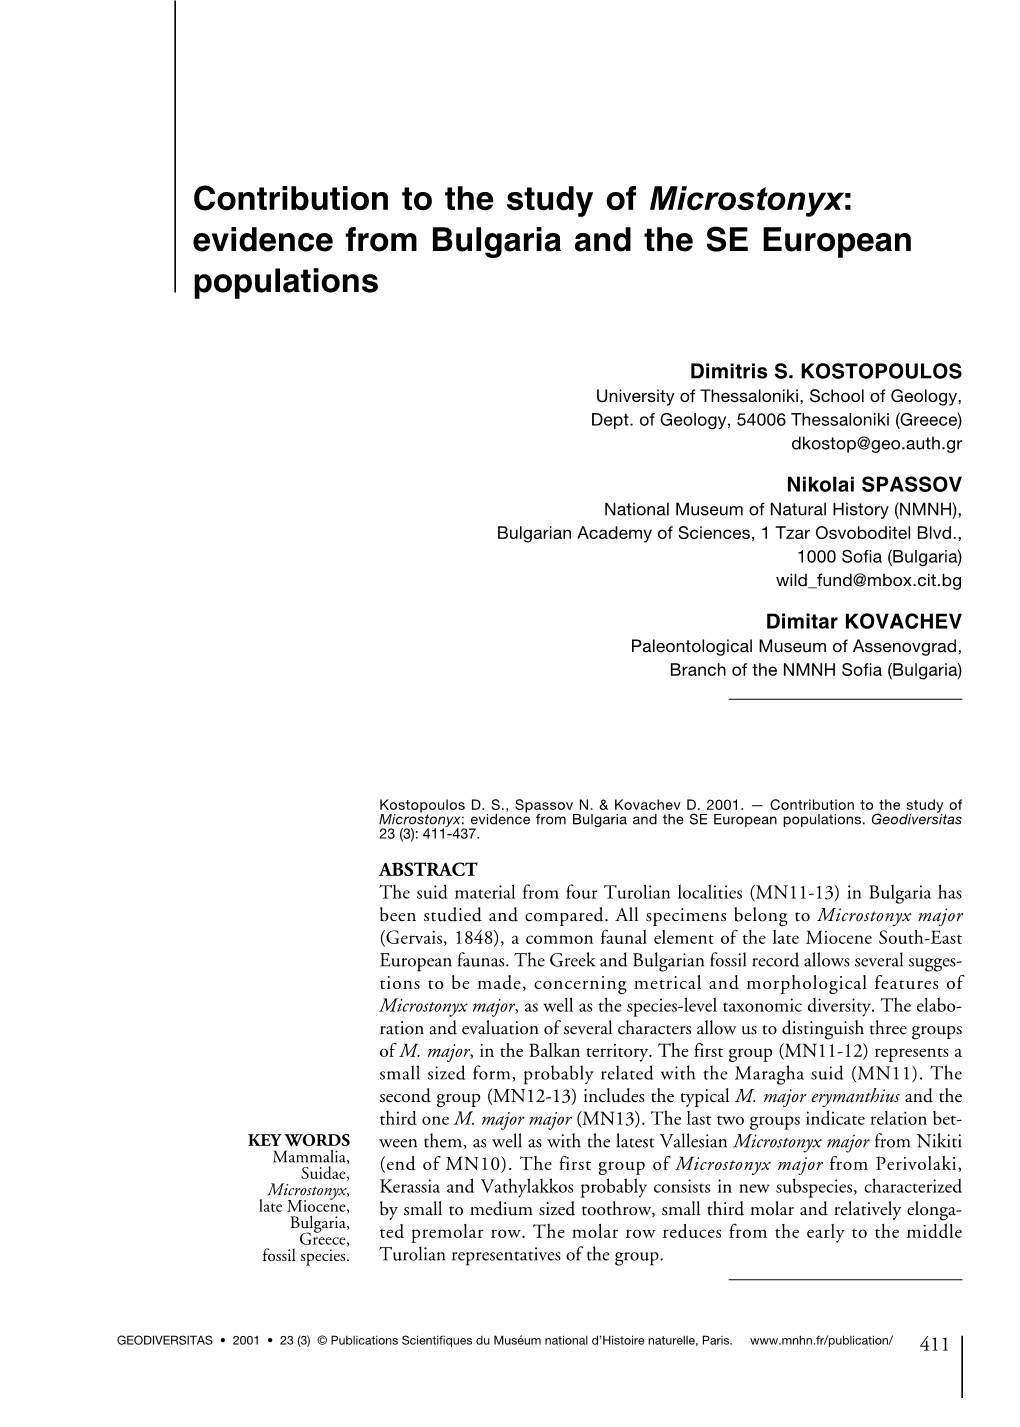 Contribution to the Study of Microstonyx: Evidence from Bulgaria and the SE European Populations